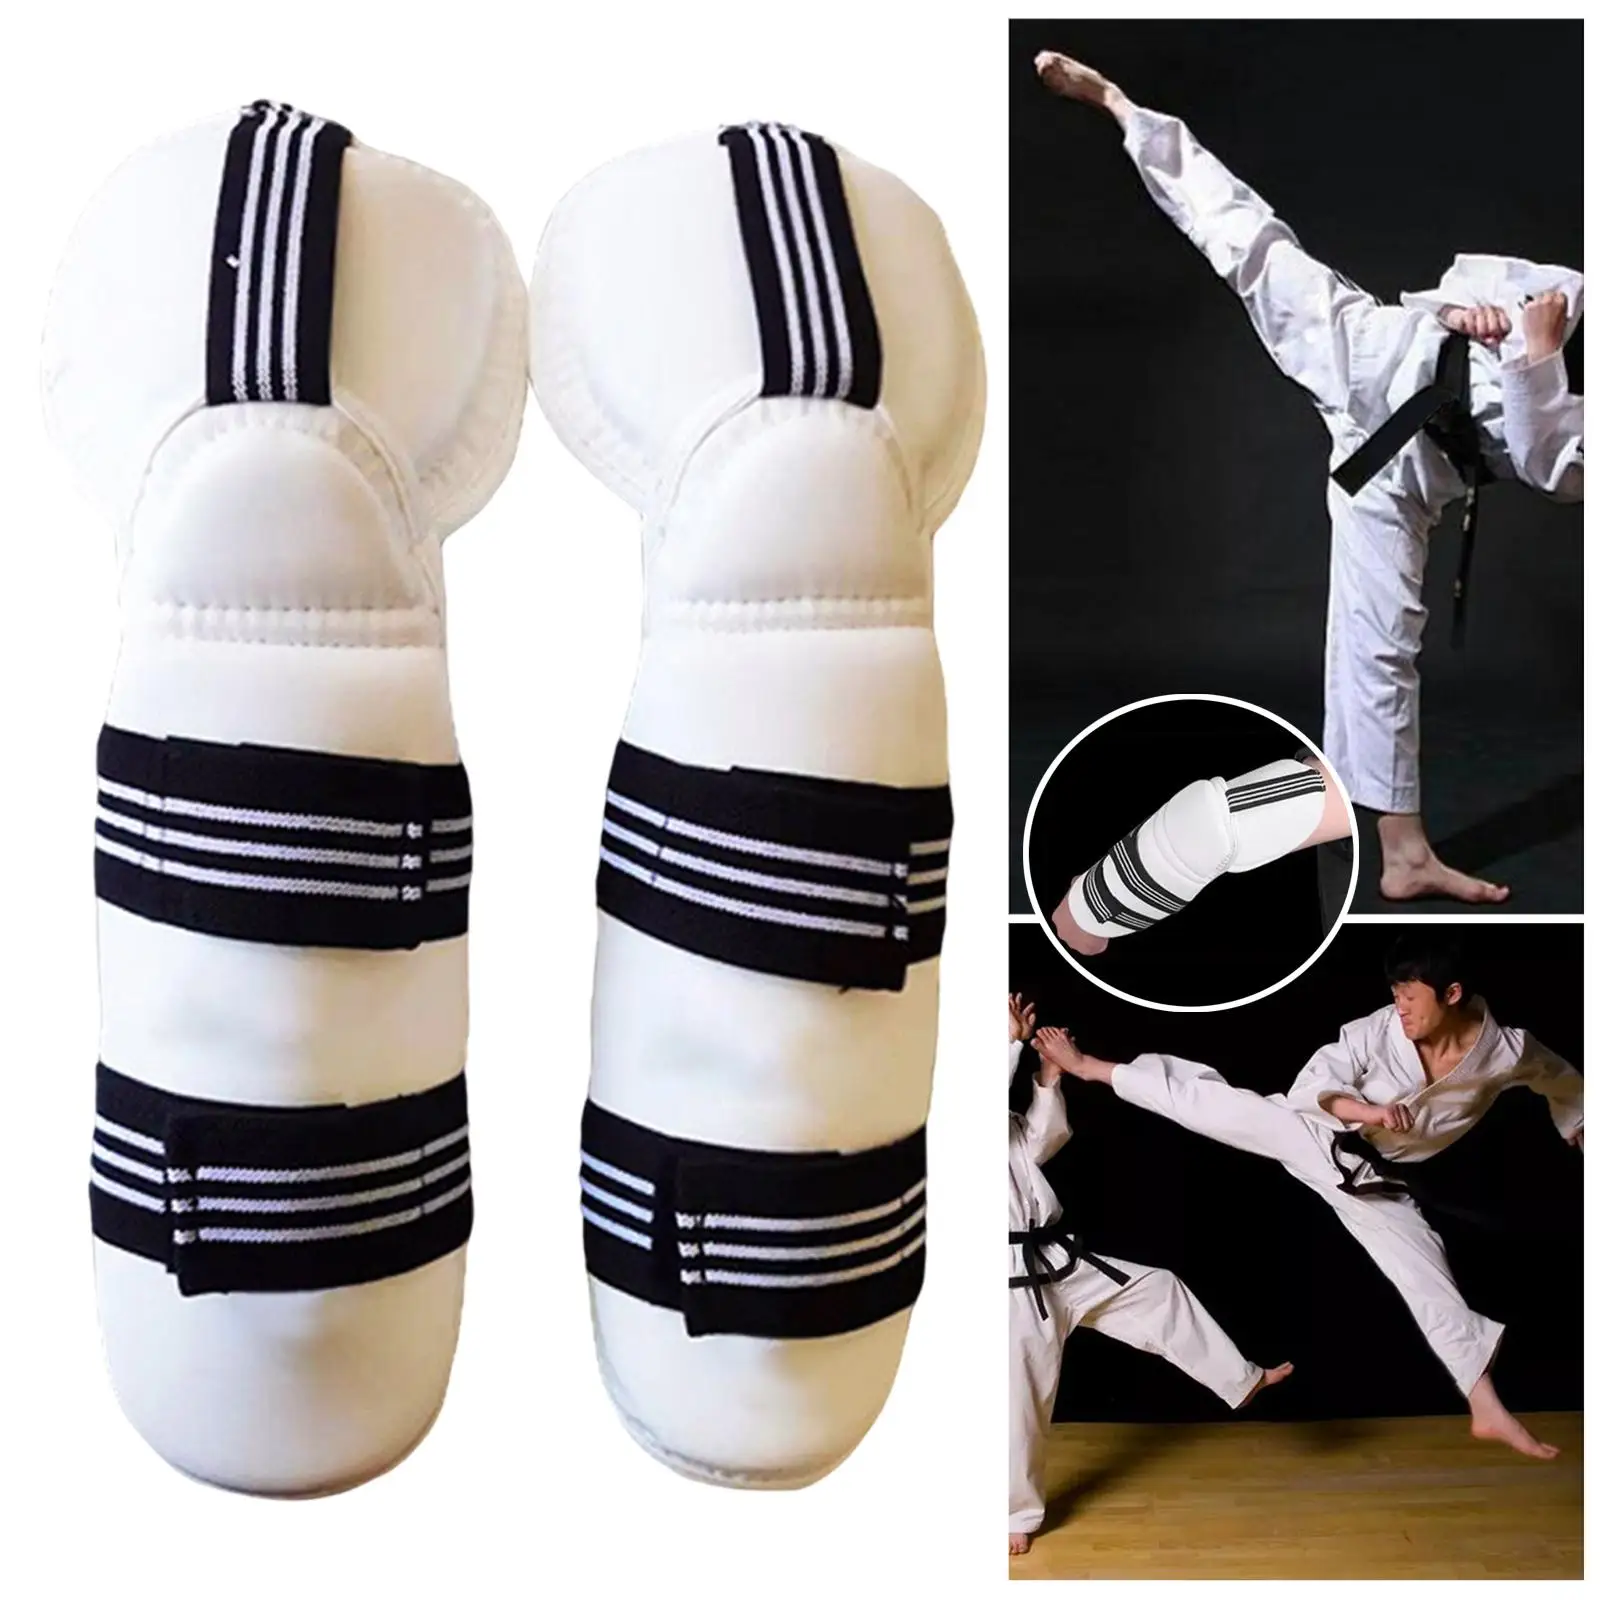 Protective Gear Taekwondo Guard Lightweight Breathable Padded Guard Protection for Fighting Match Sanda Unisex Adult Kids